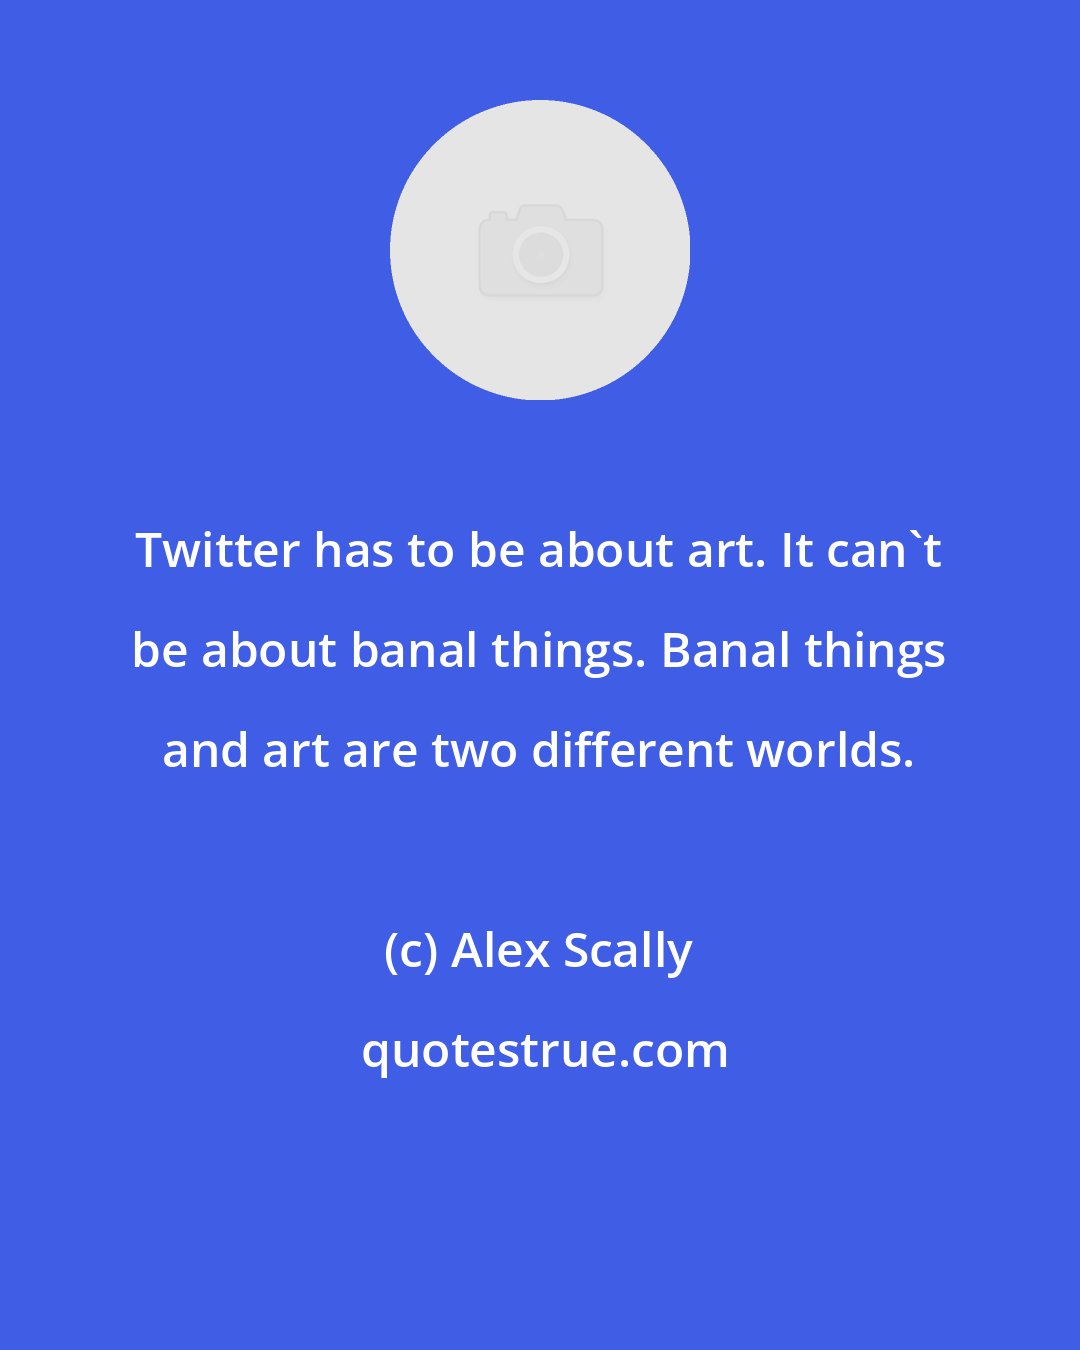 Alex Scally: Twitter has to be about art. It can't be about banal things. Banal things and art are two different worlds.